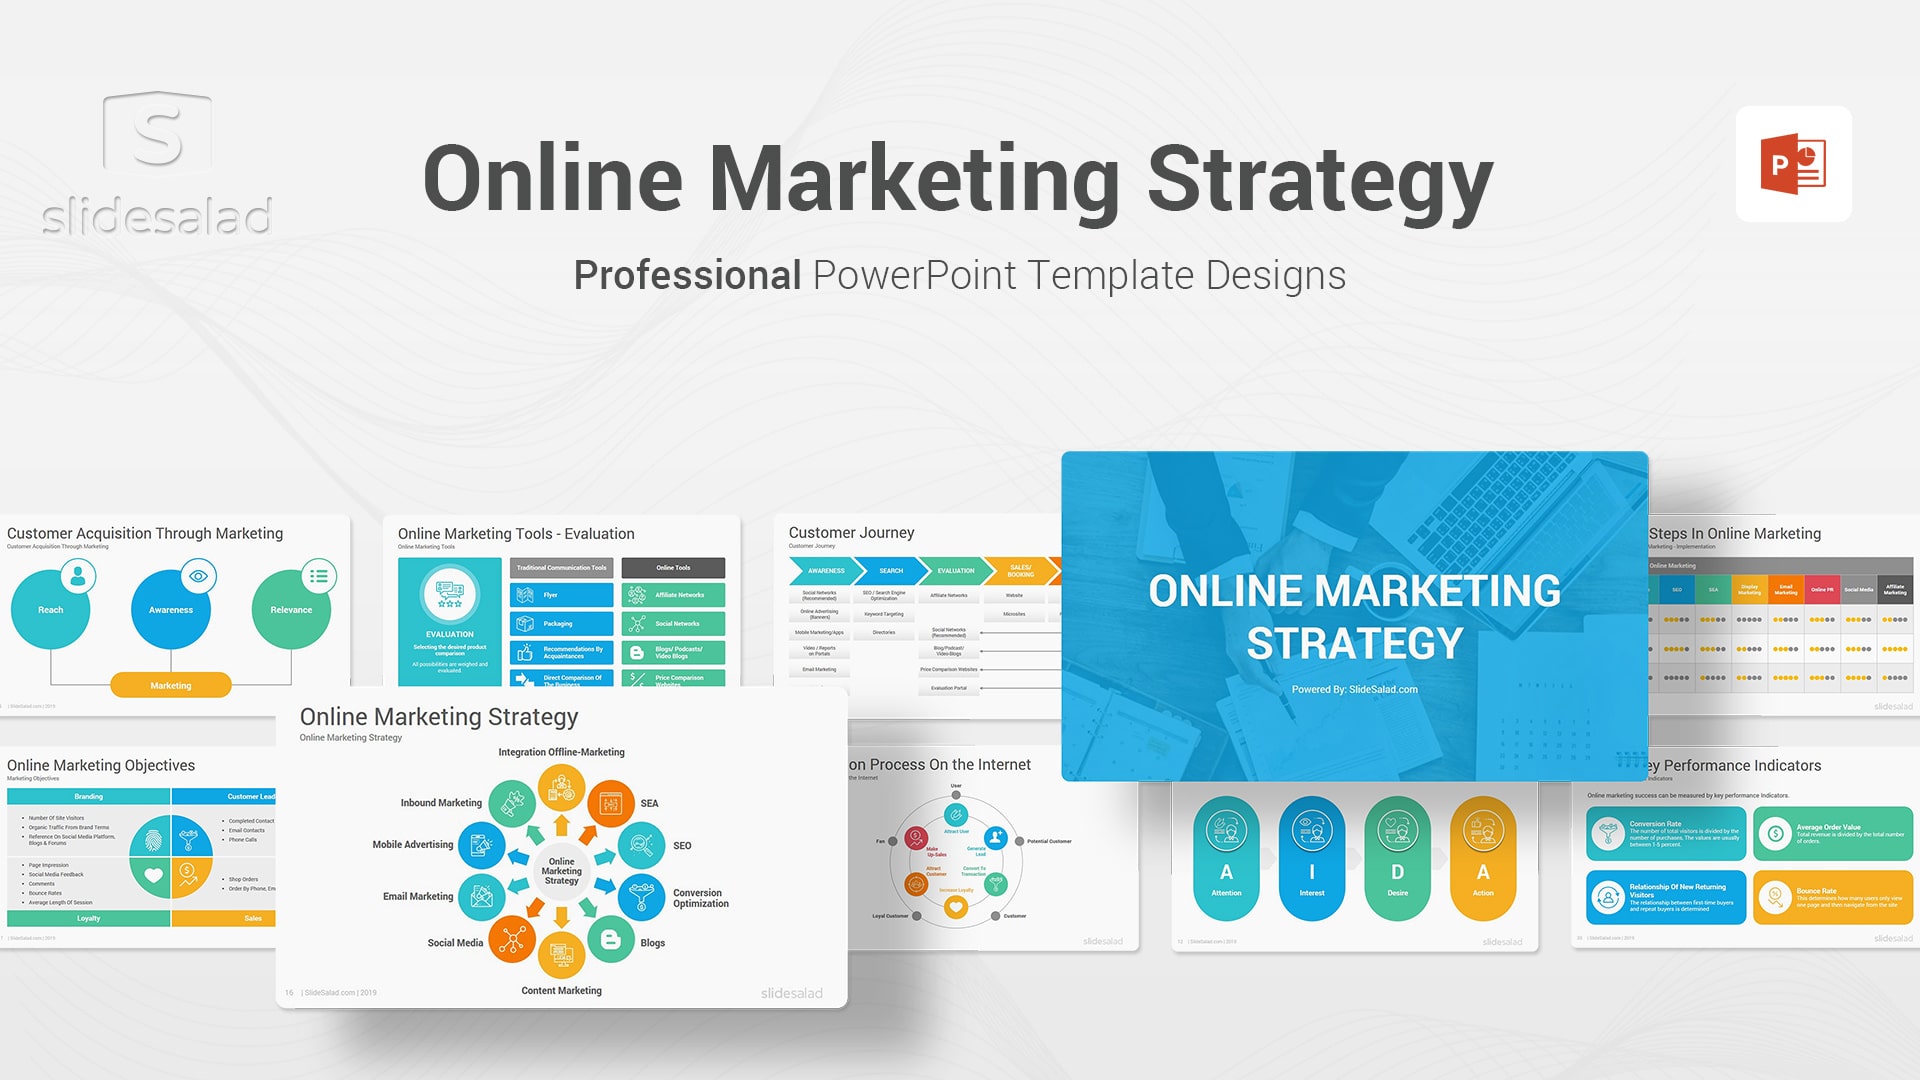 Online Marketing Strategy PowerPoint Template - Unique Digital Marketing Strategy PPT Templates for Marketers